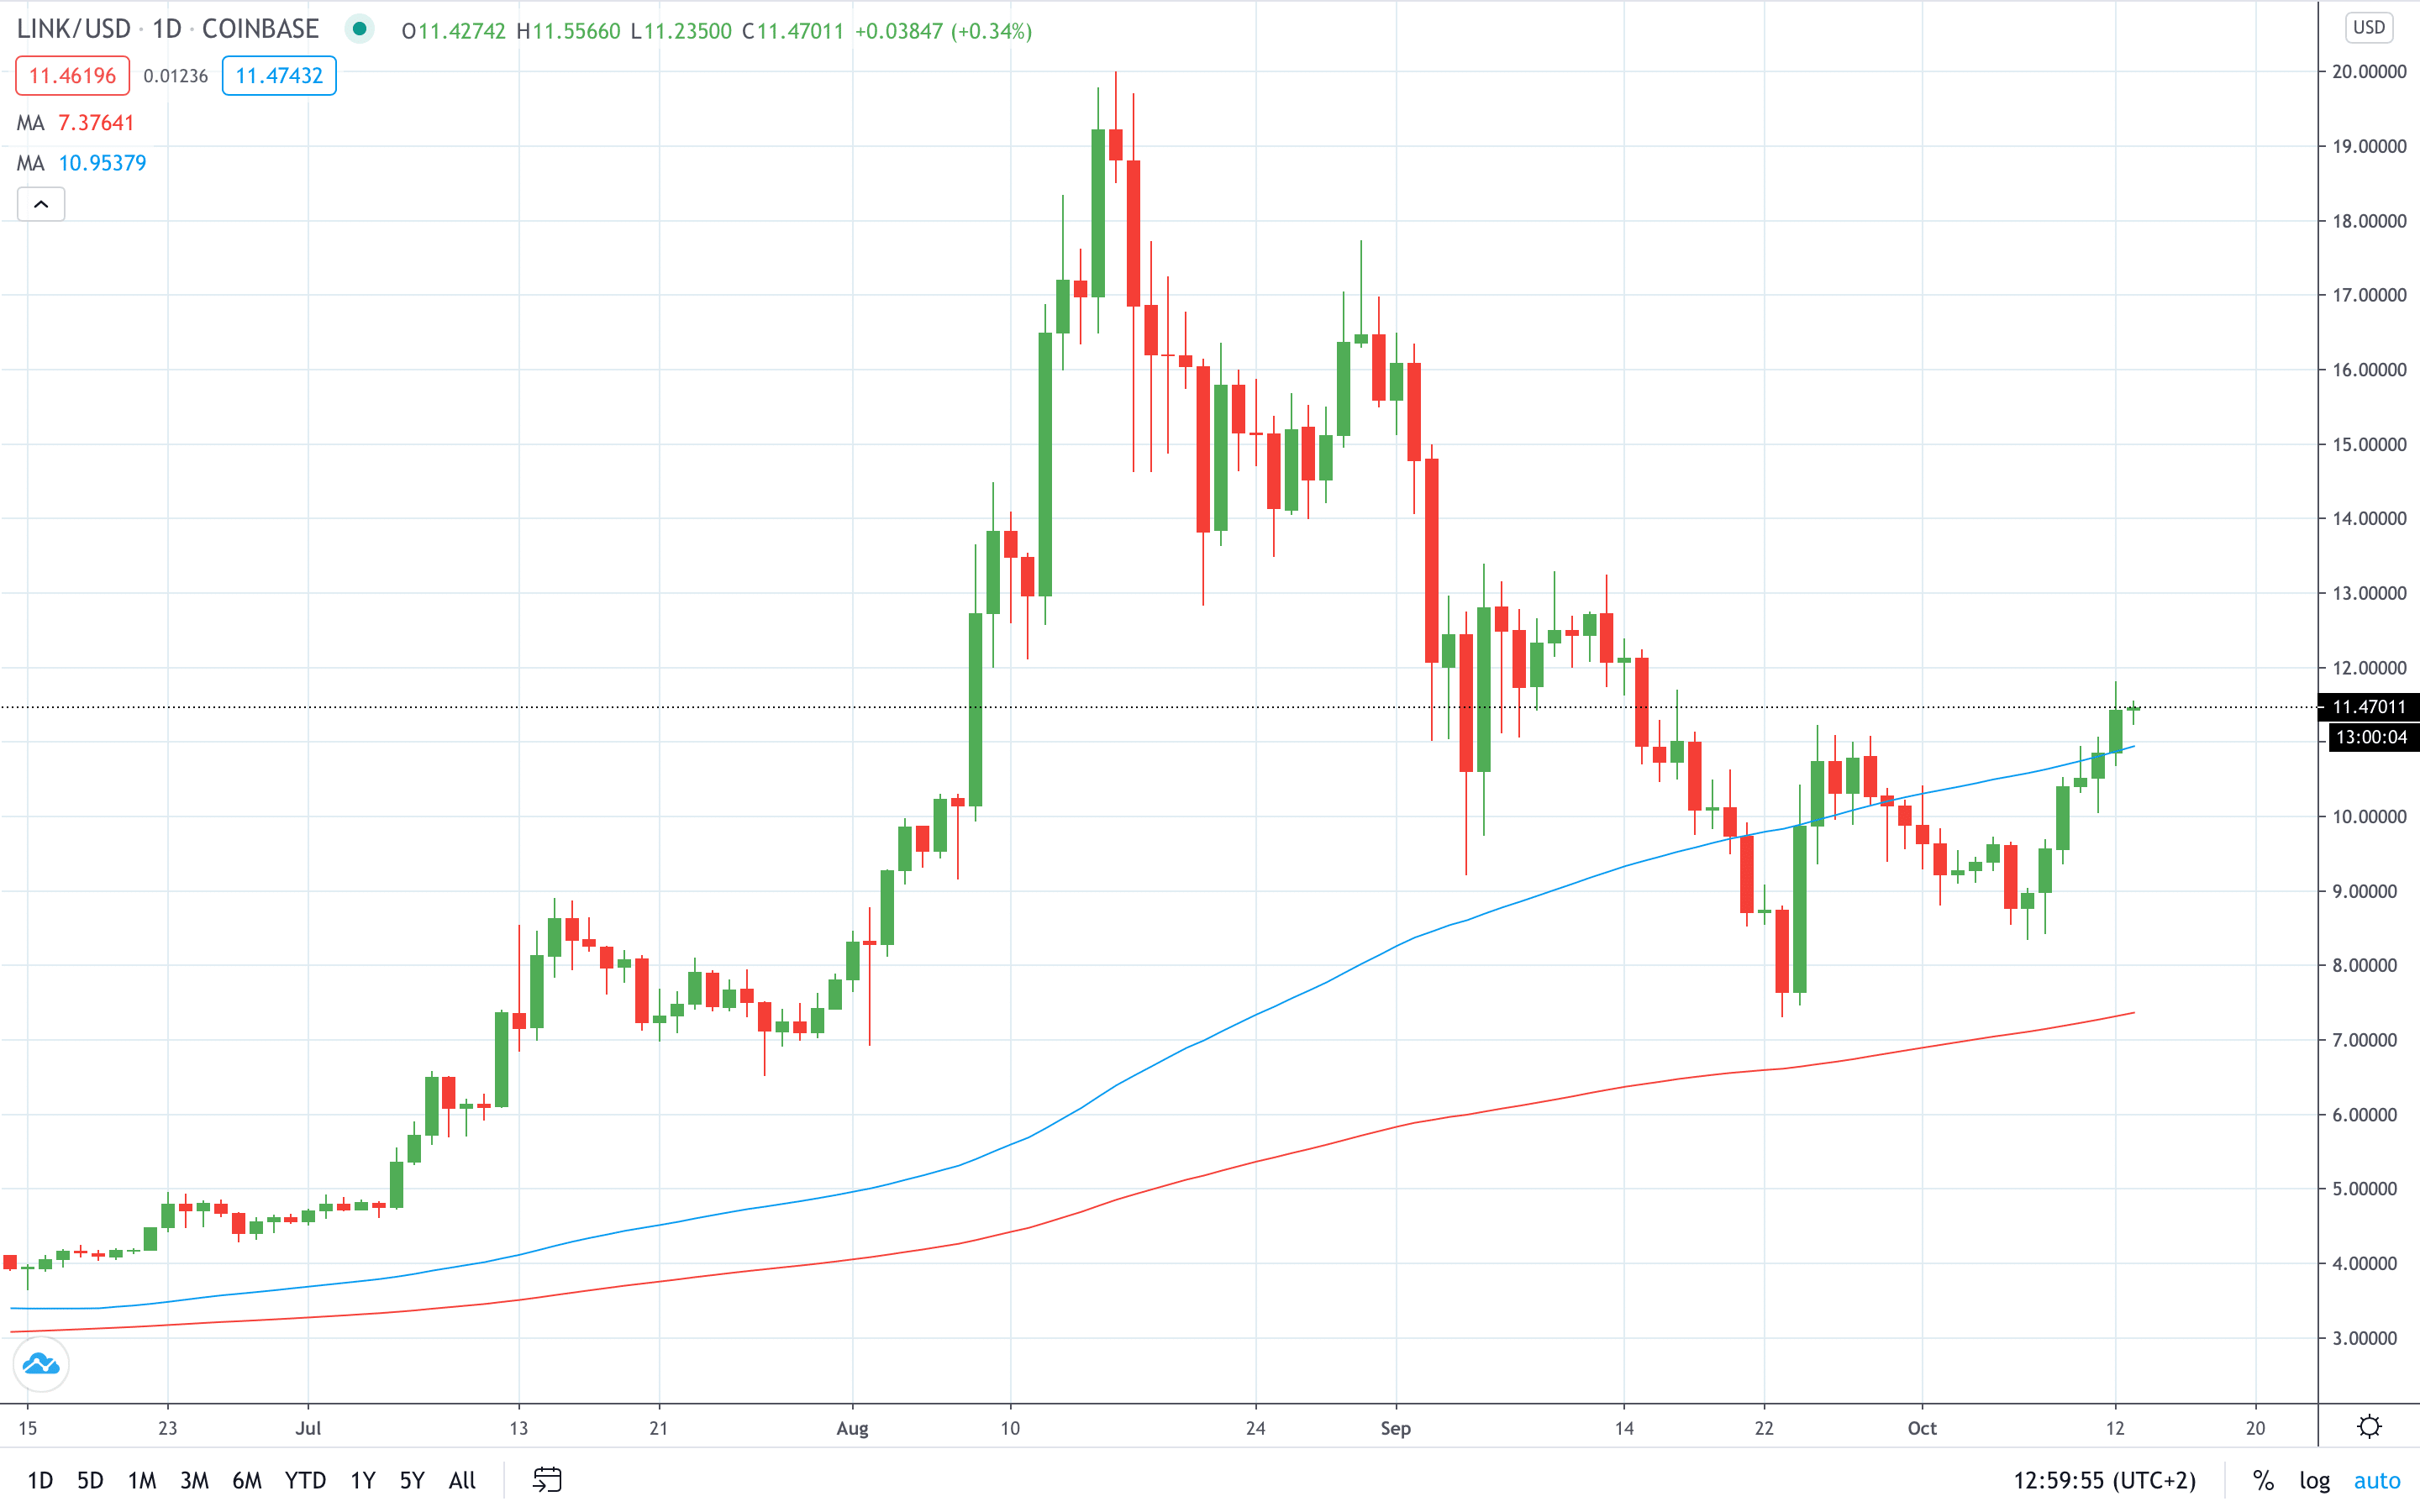 LINK/USD has continued to make gains as it now trades at $11.50 October 2020 